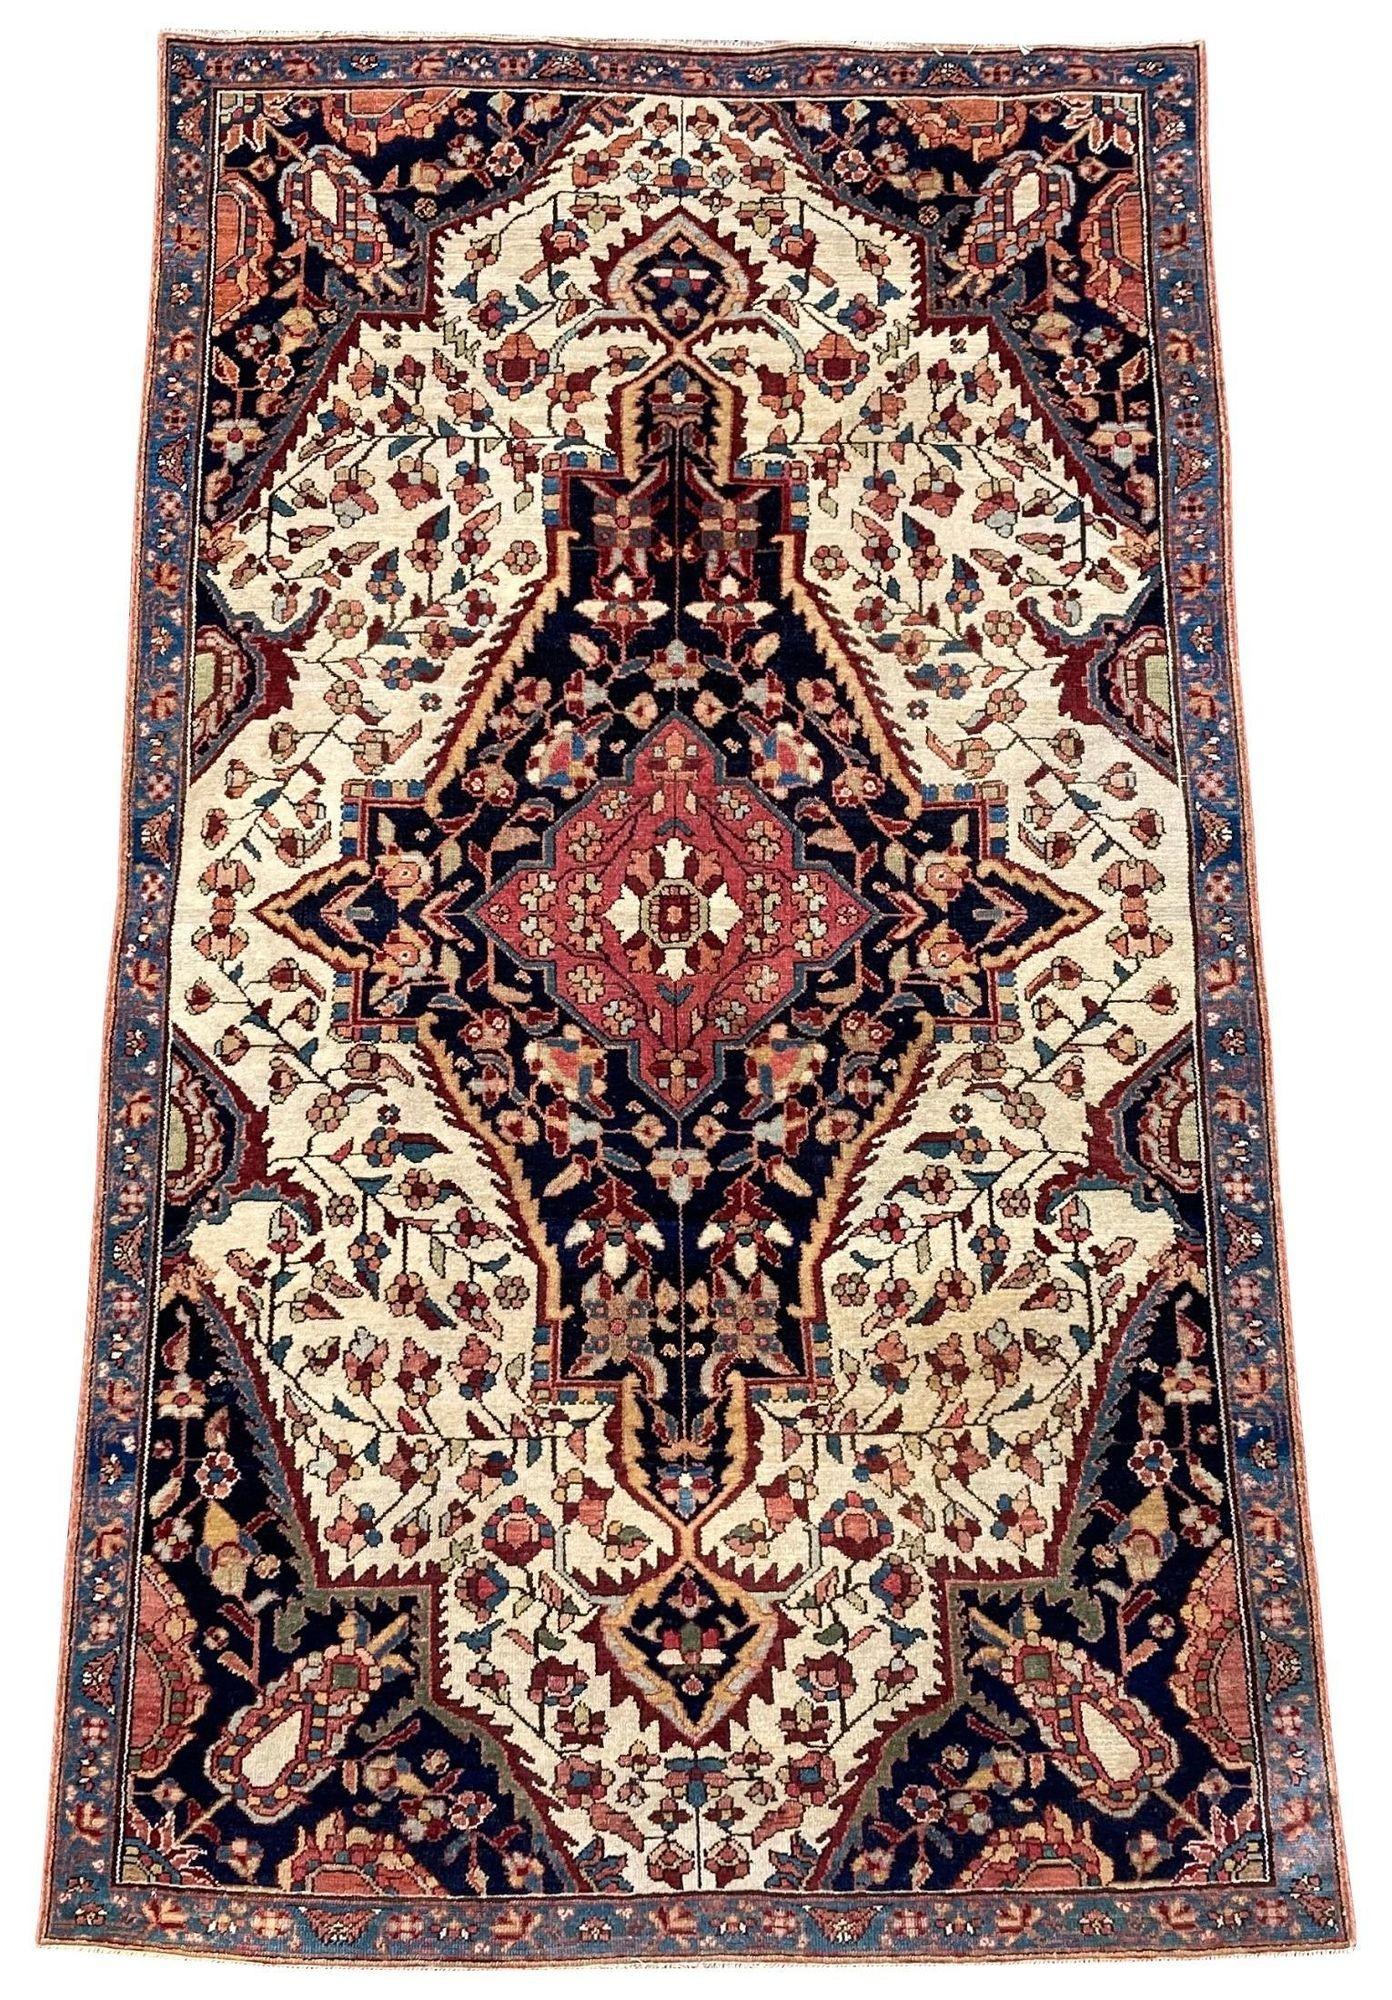 A lovely antique Malayer rug in a rare small size, handwoven circa 1900 with a single, large medallion design on an ivory floral field and great secondary colours. Very finely woven with very good quality wool.
Size: 1.66m x 0.98m (5ft 5in x 3ft